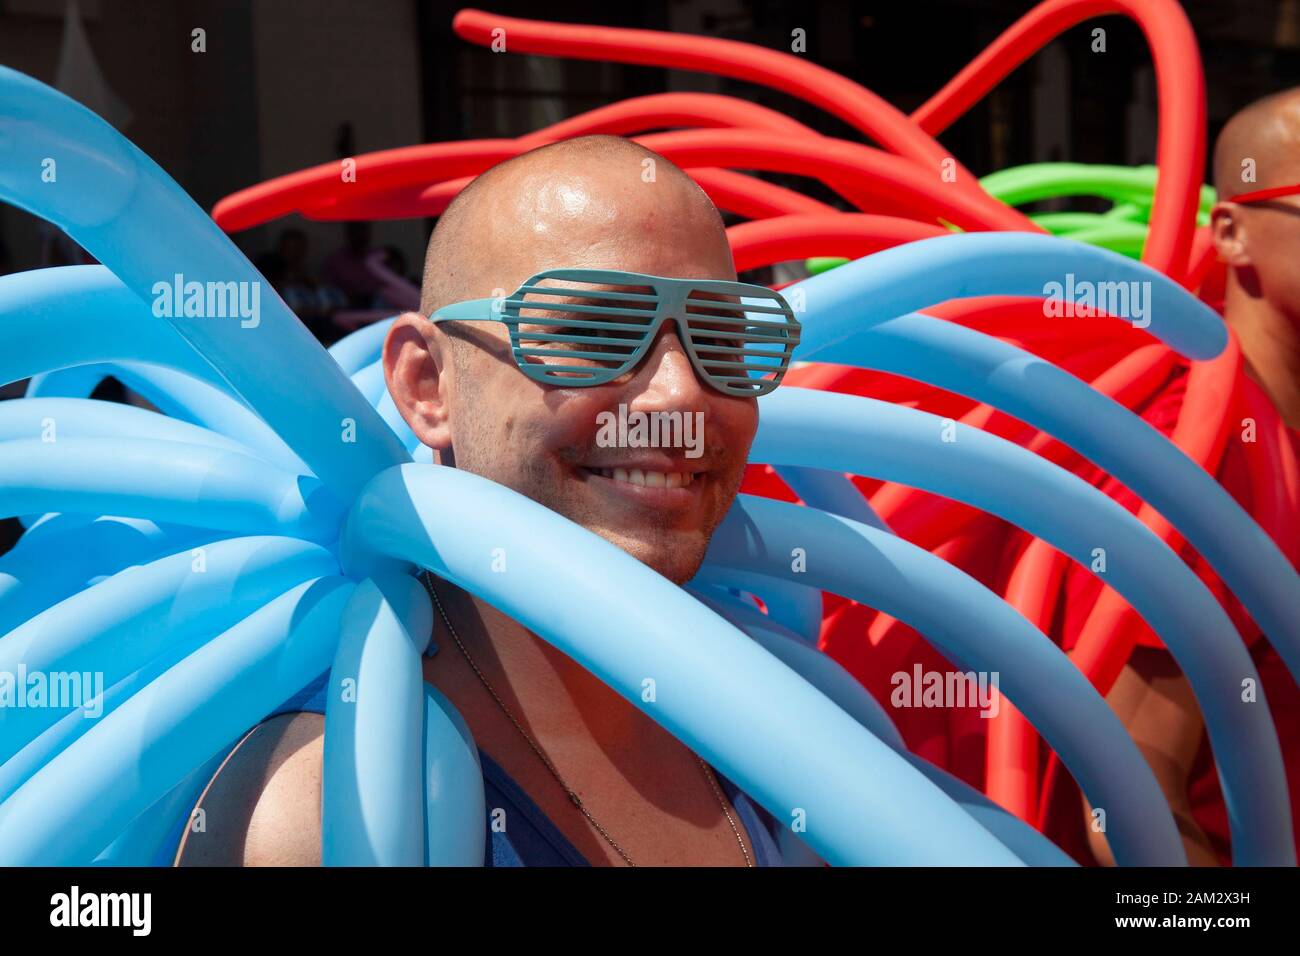 Pride parade participants in tentacle-like balloon costume, Vancouver Pride Festival 2014, Vancouver, Canada Stock Photo